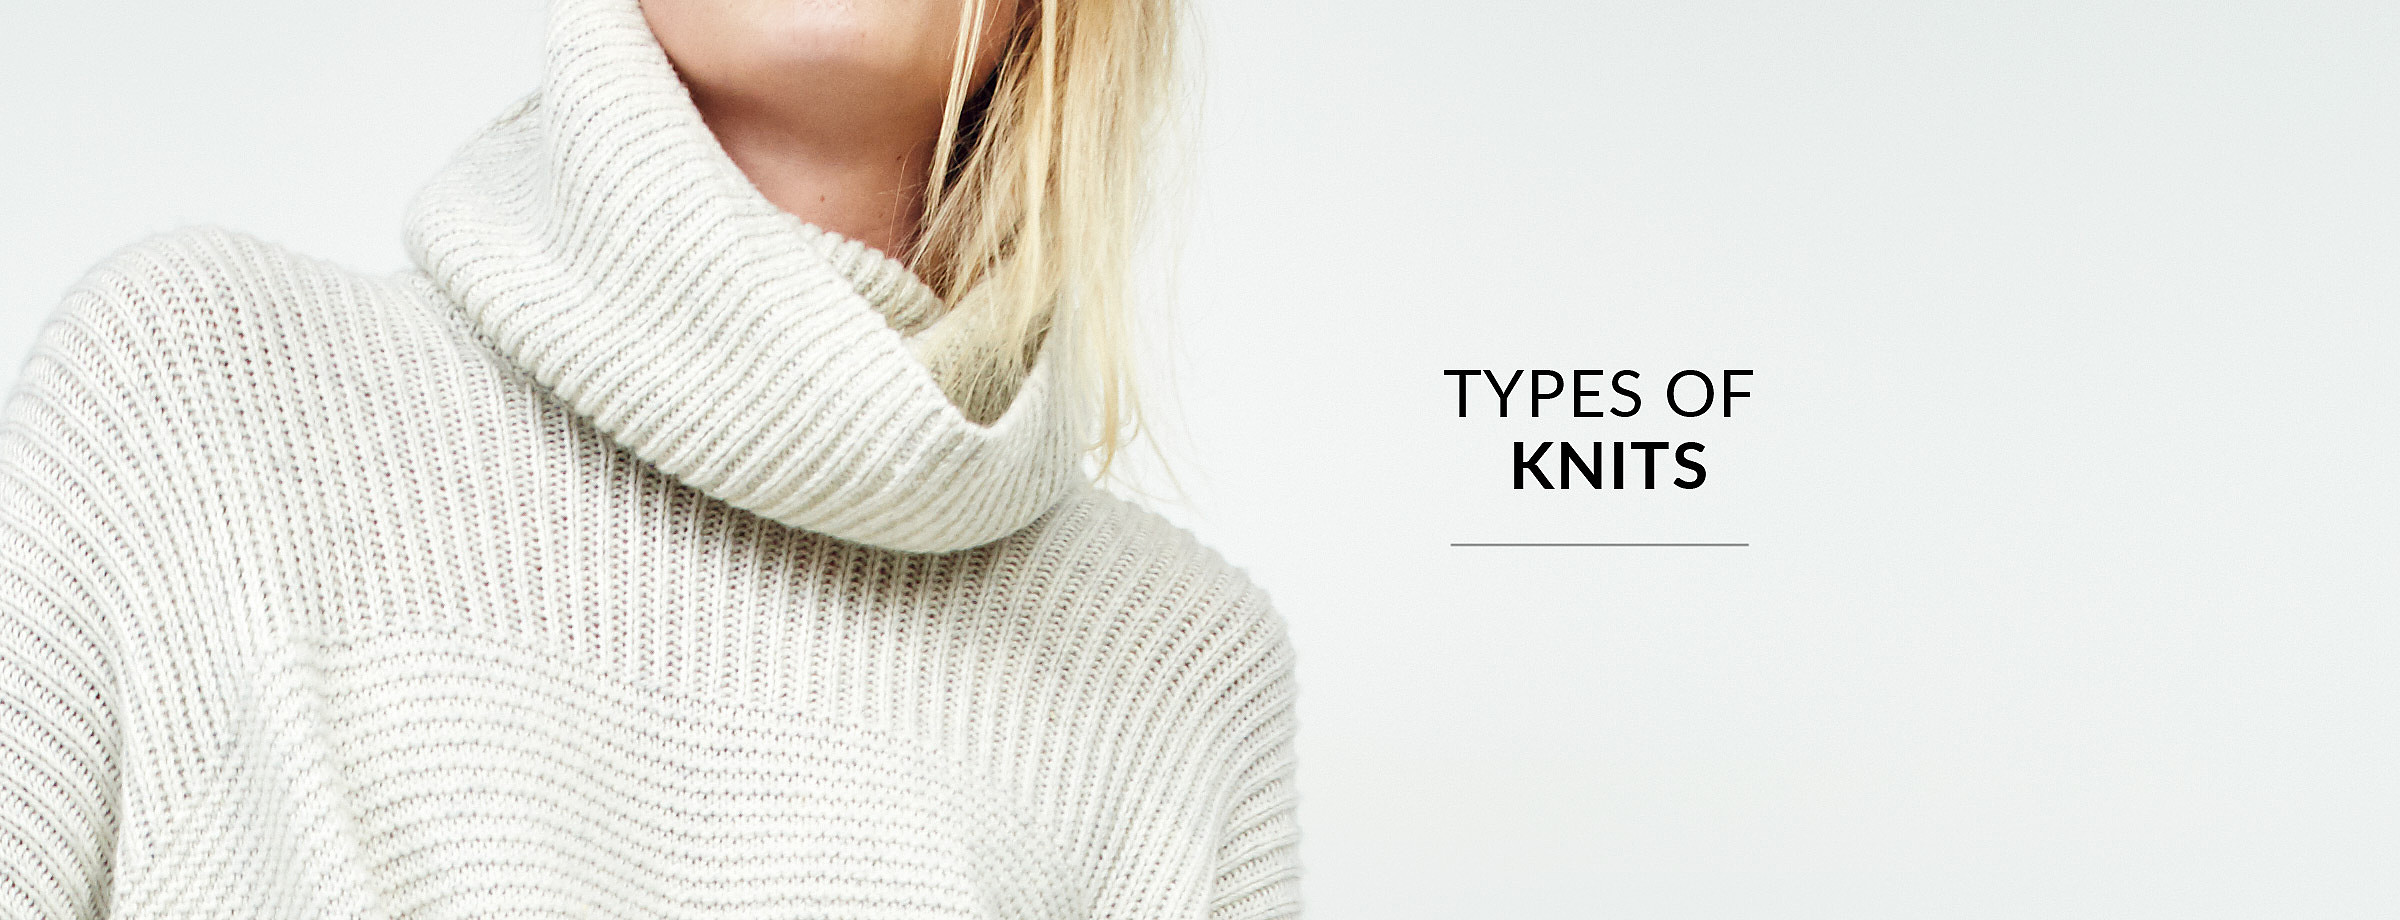 Types of knits